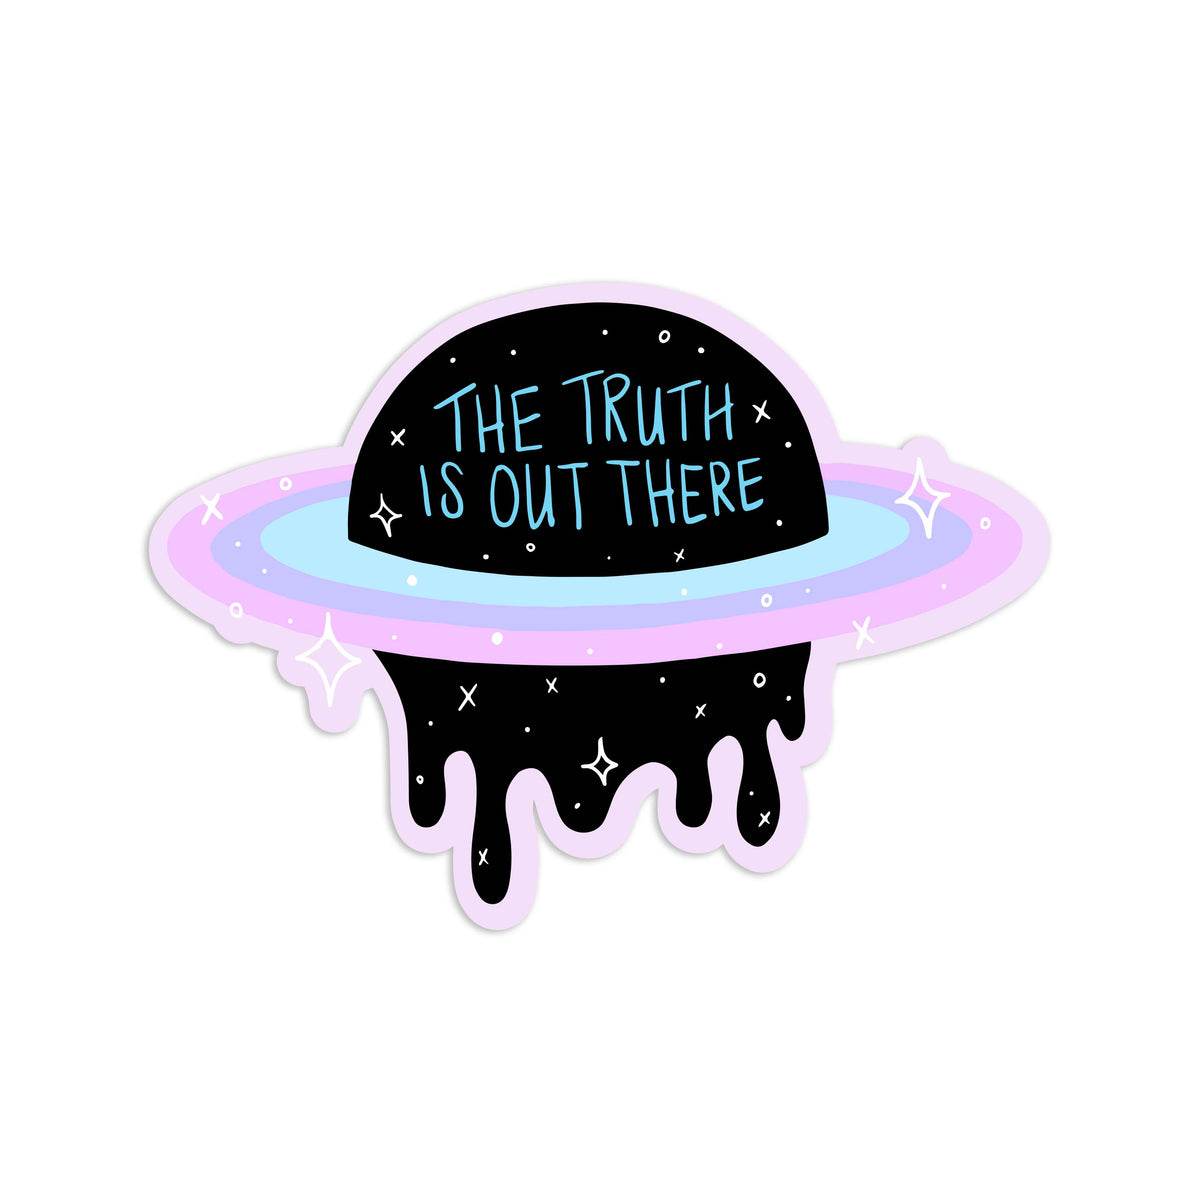 The Truth is Out There // Sticker